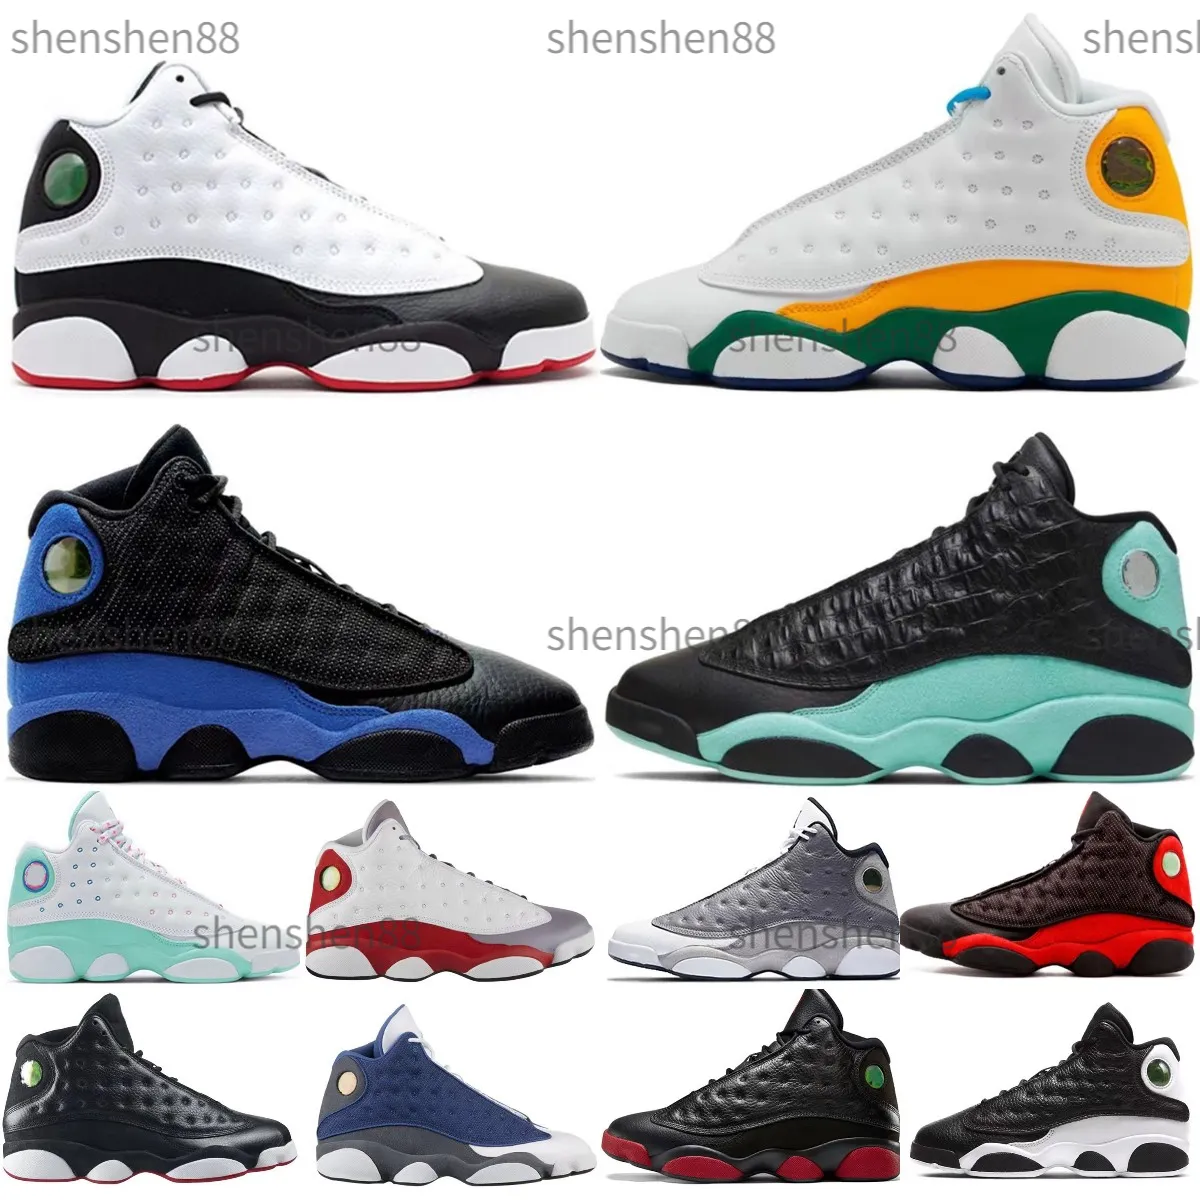 High quality 13 basketball sneakers shoes Jumpman 13s Mens Bred GymGrey womens sneakers